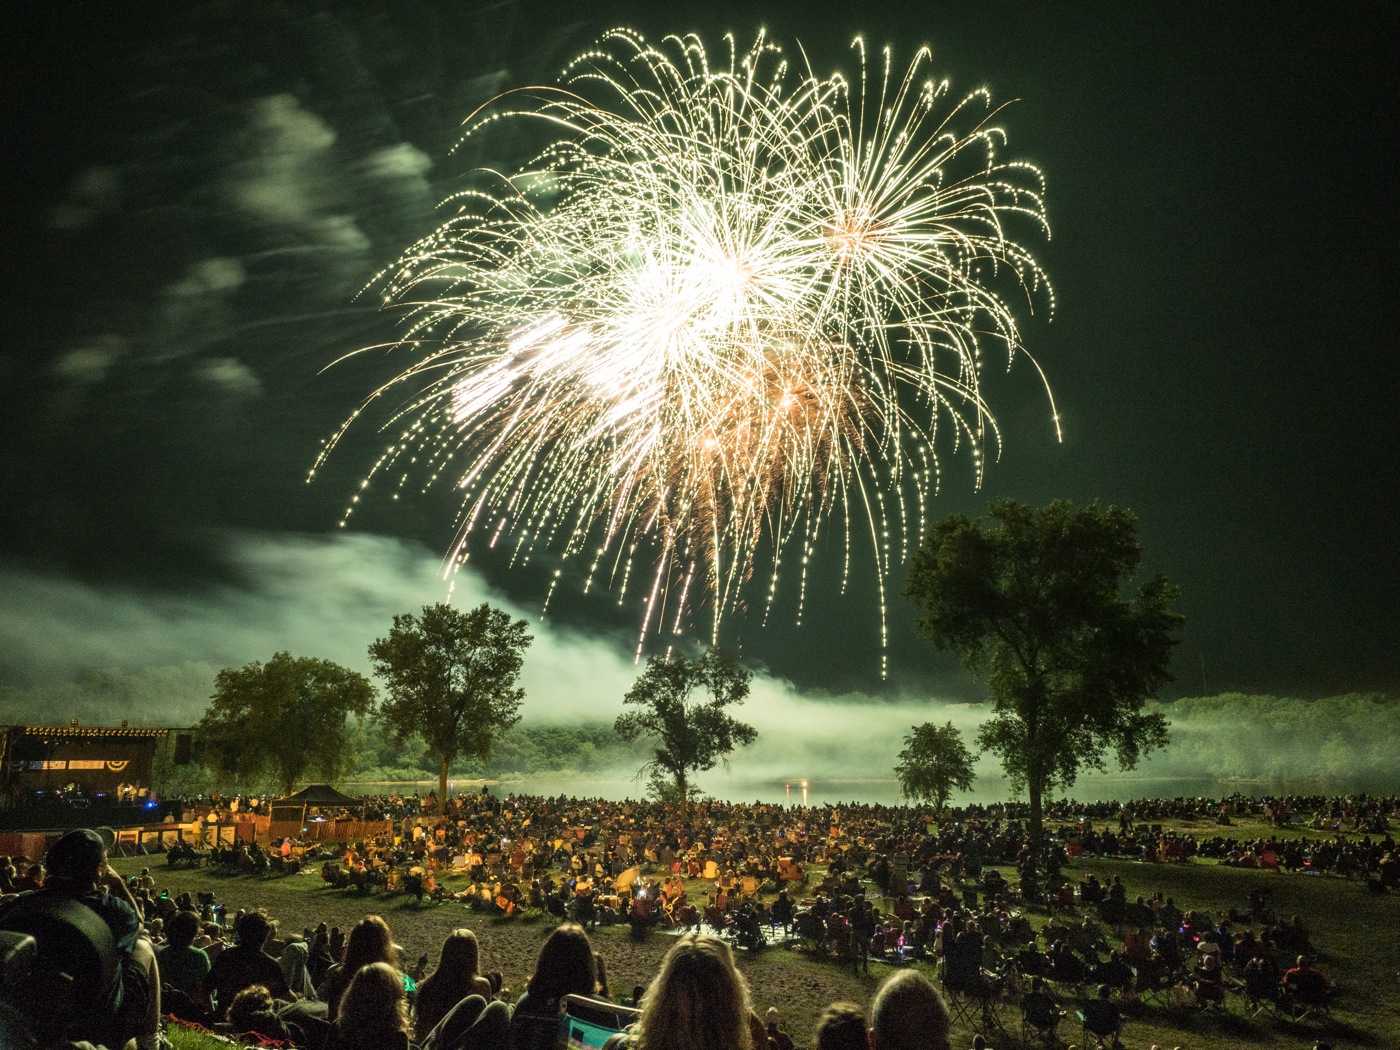 image of fireworks exploding over a crowd